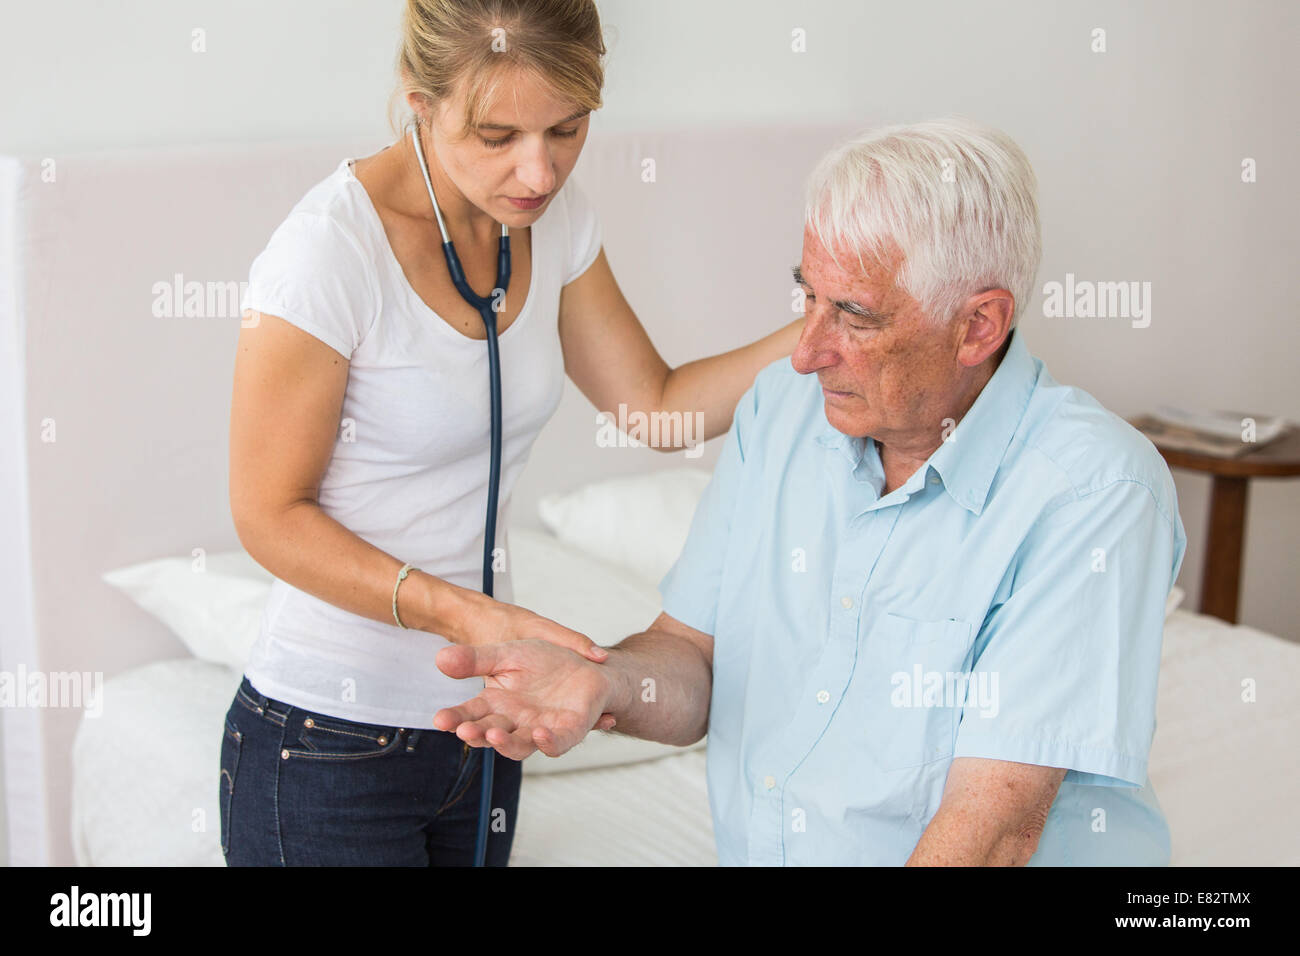 Doctor checking the pulse of an elderly patient. Stock Photo